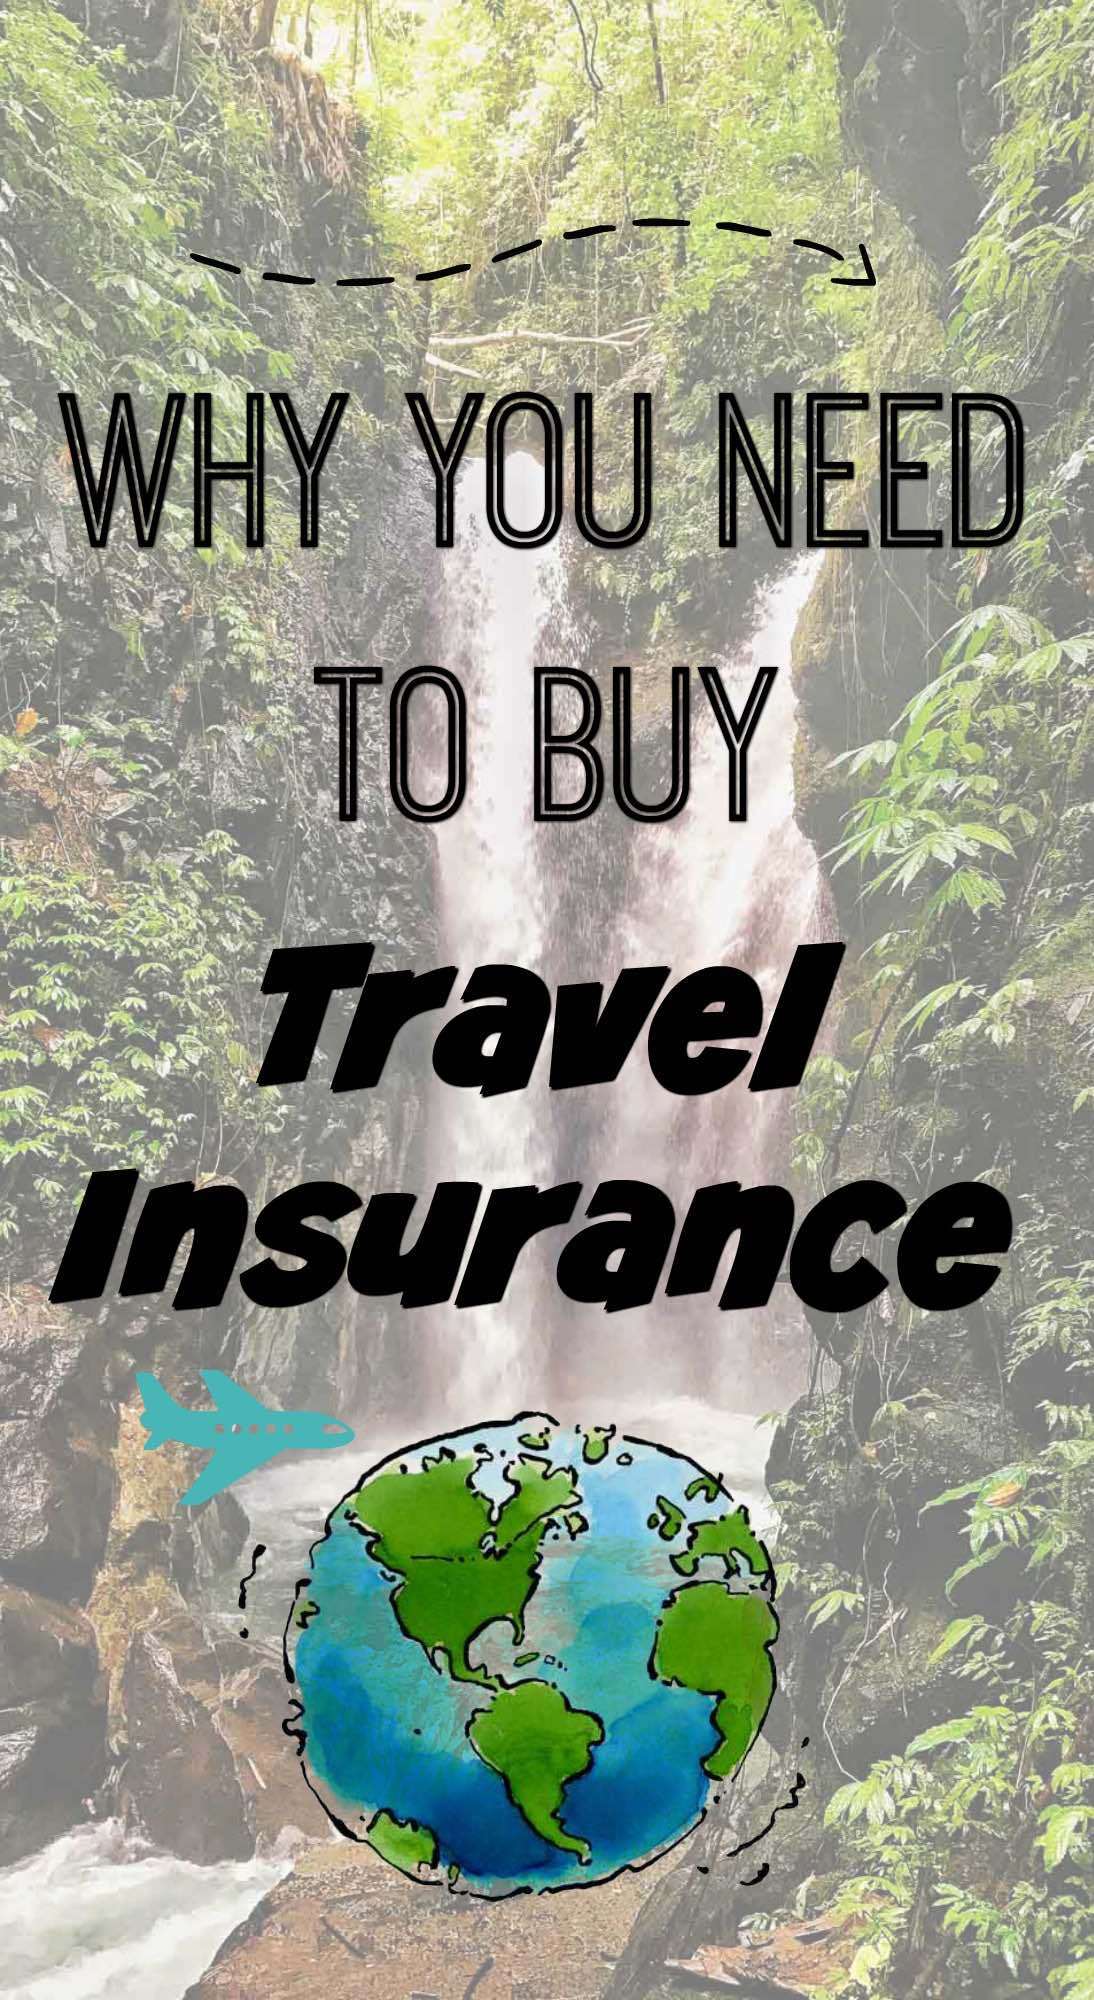 Why you need to buy travel insurance